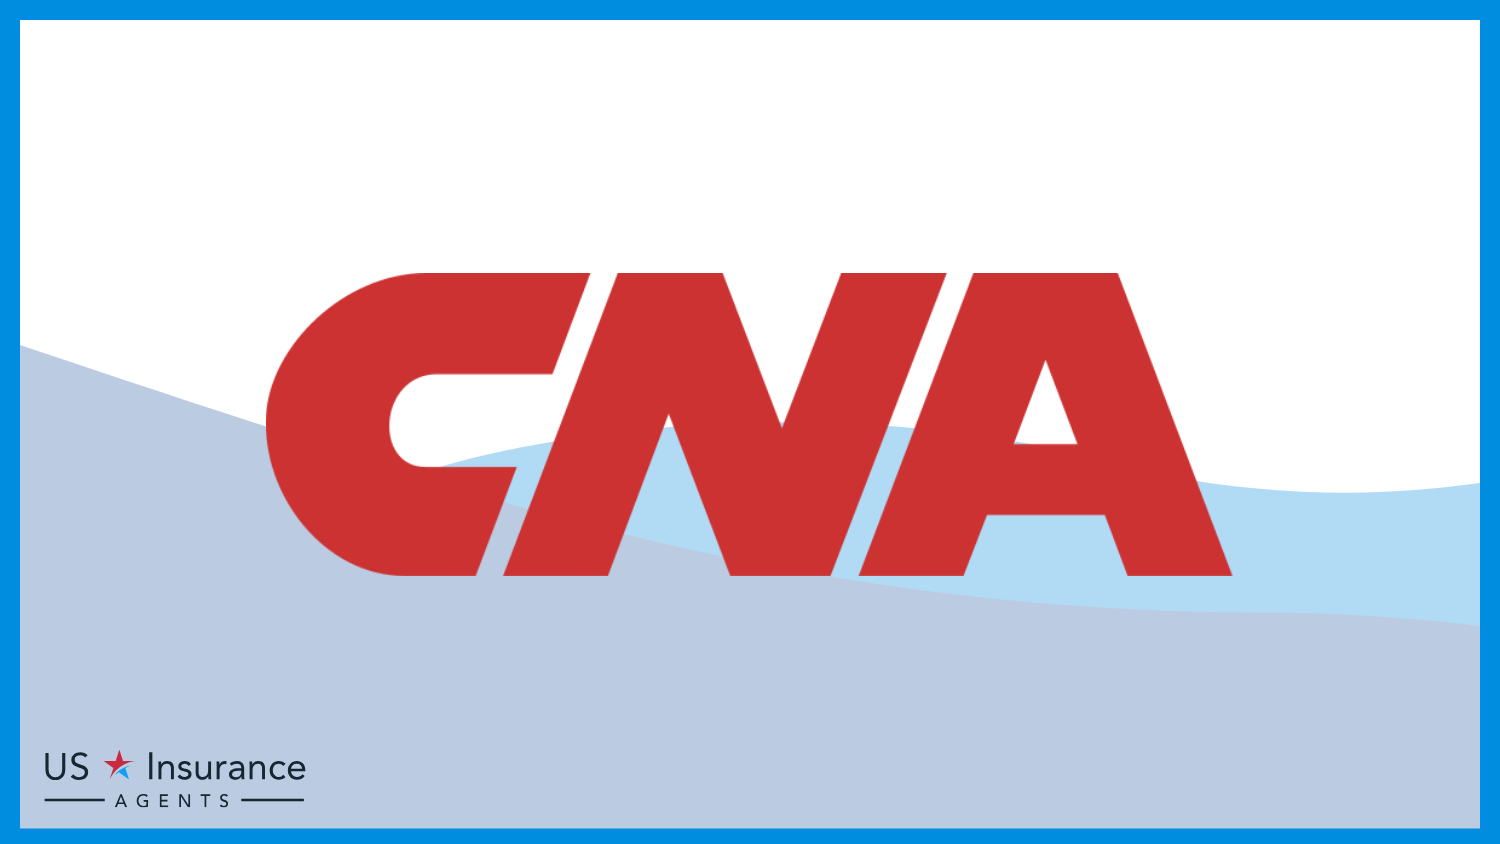 CNA: Best Business Insurance for Printing Services